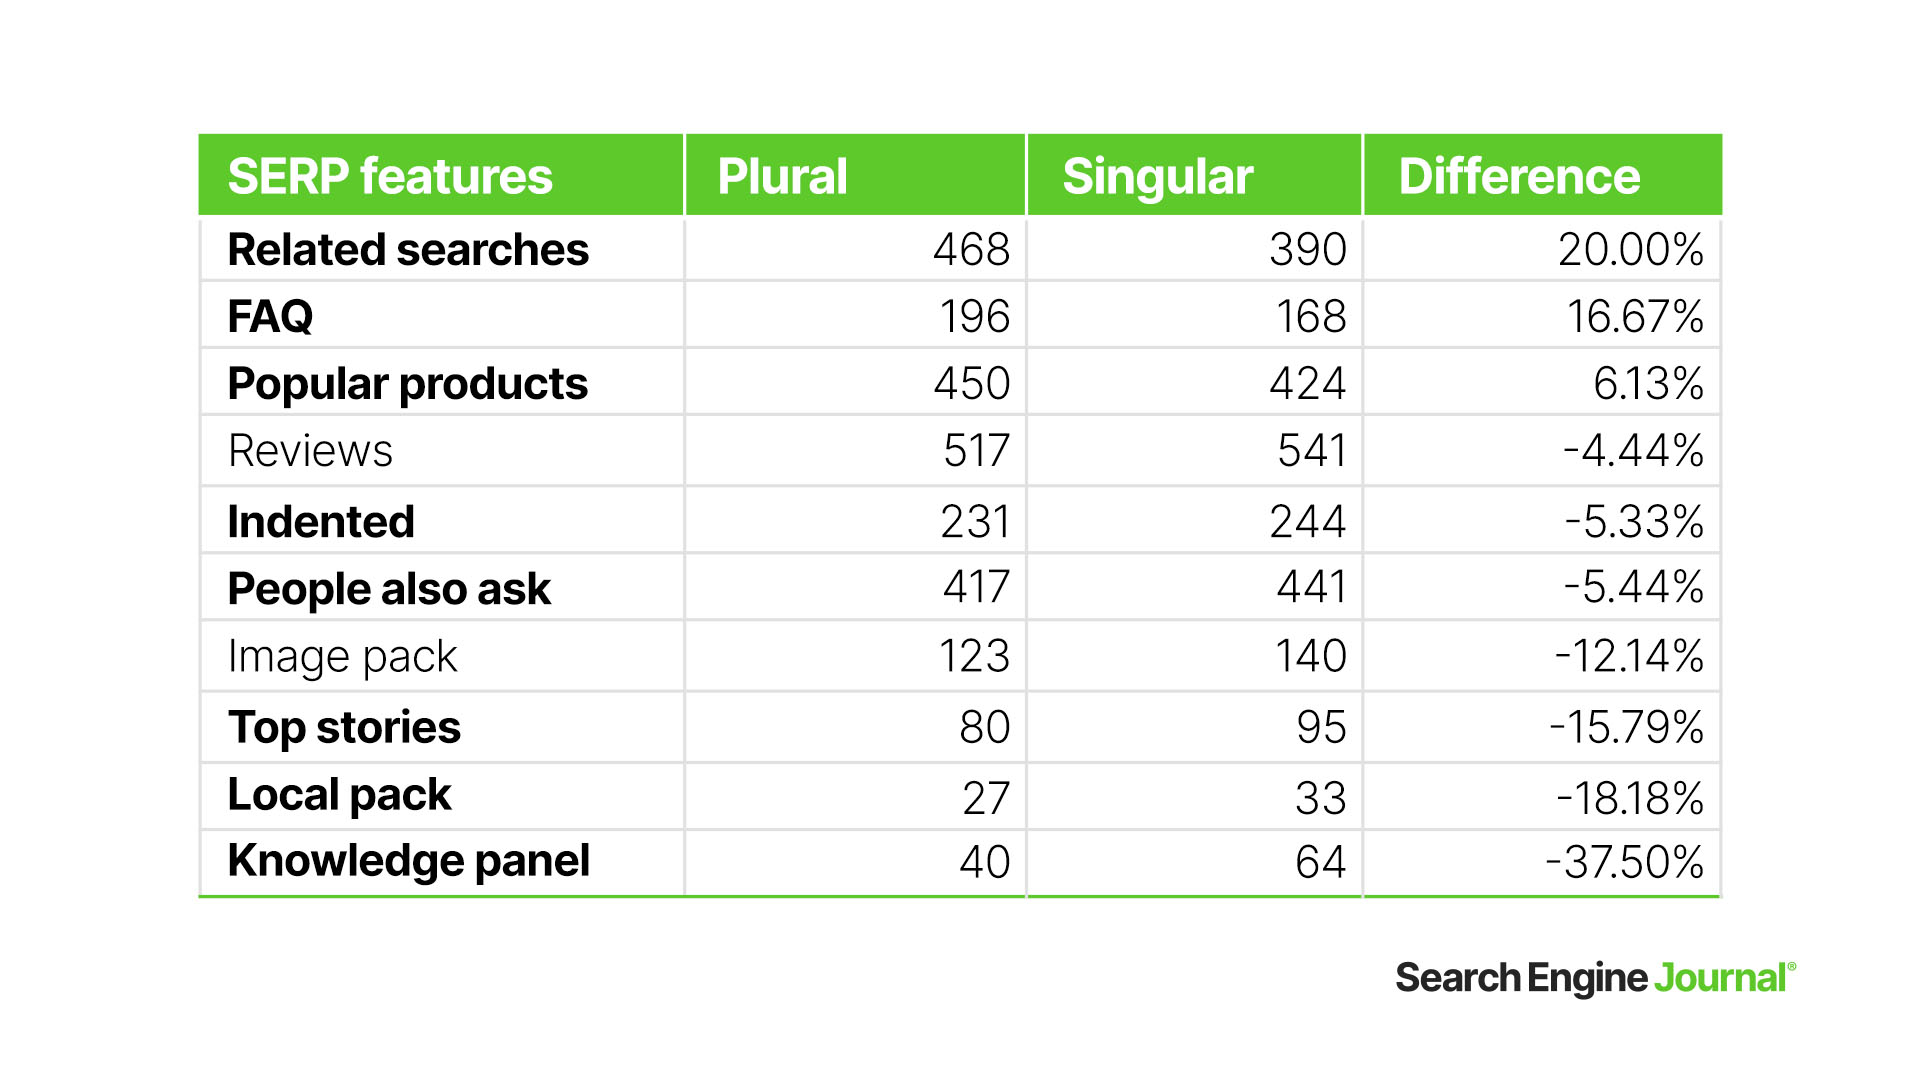 How Plural Keywords Impact Search Intent For Ecommerce [Data Study]